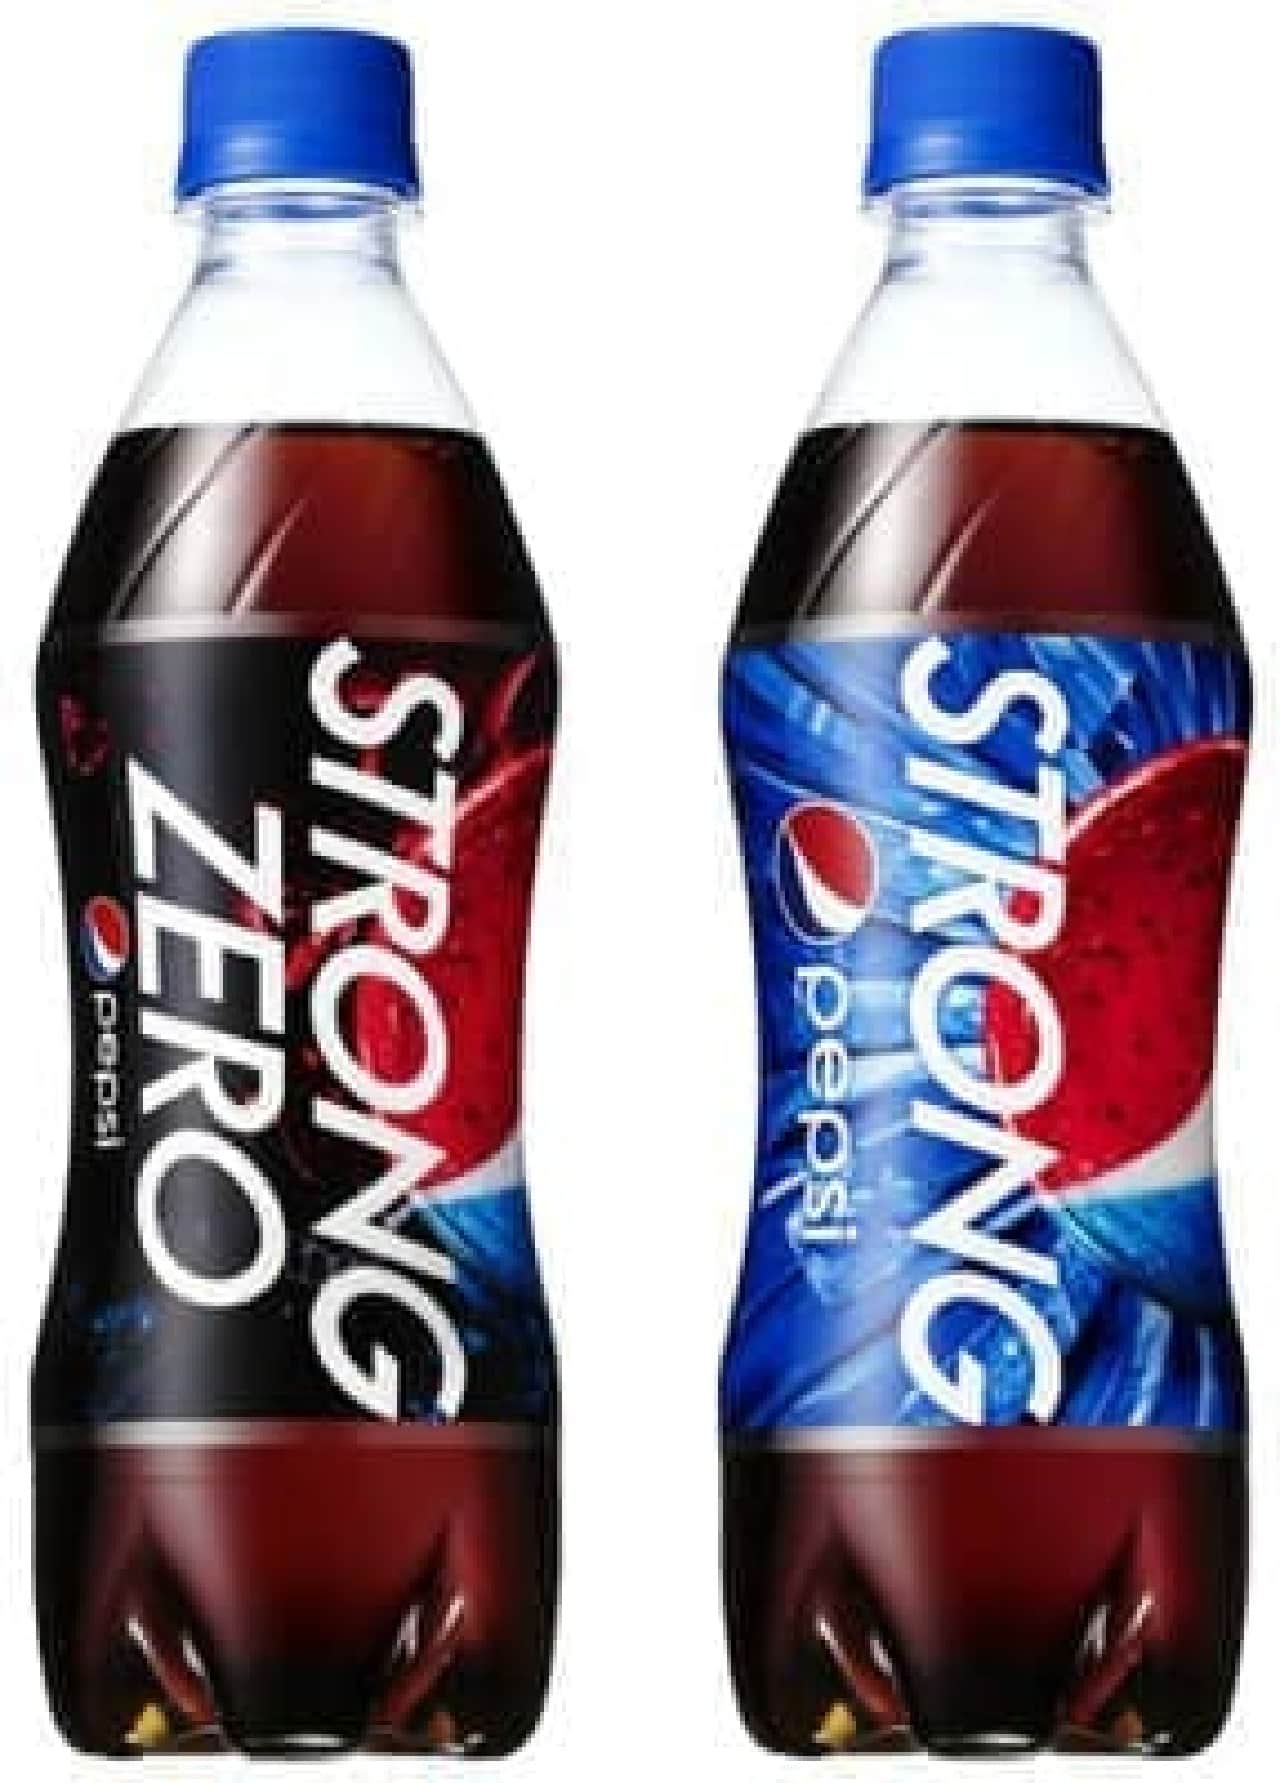 "Pepsi's strongest stimulus" "Pepsi Strong" is now available